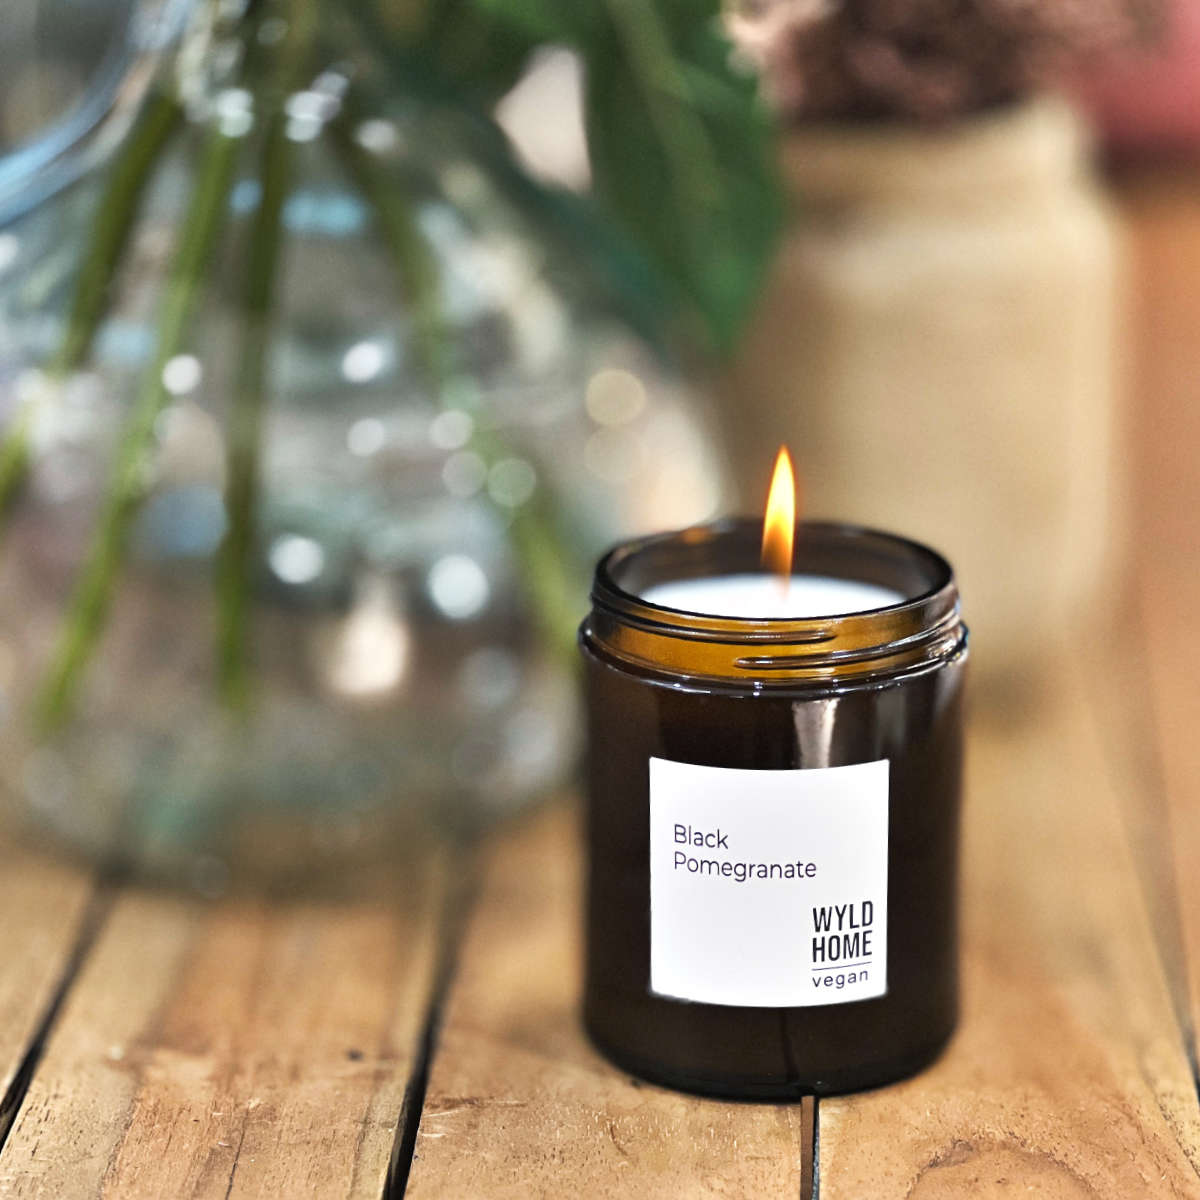 Black Pomegranate Candle-WYLD HOME